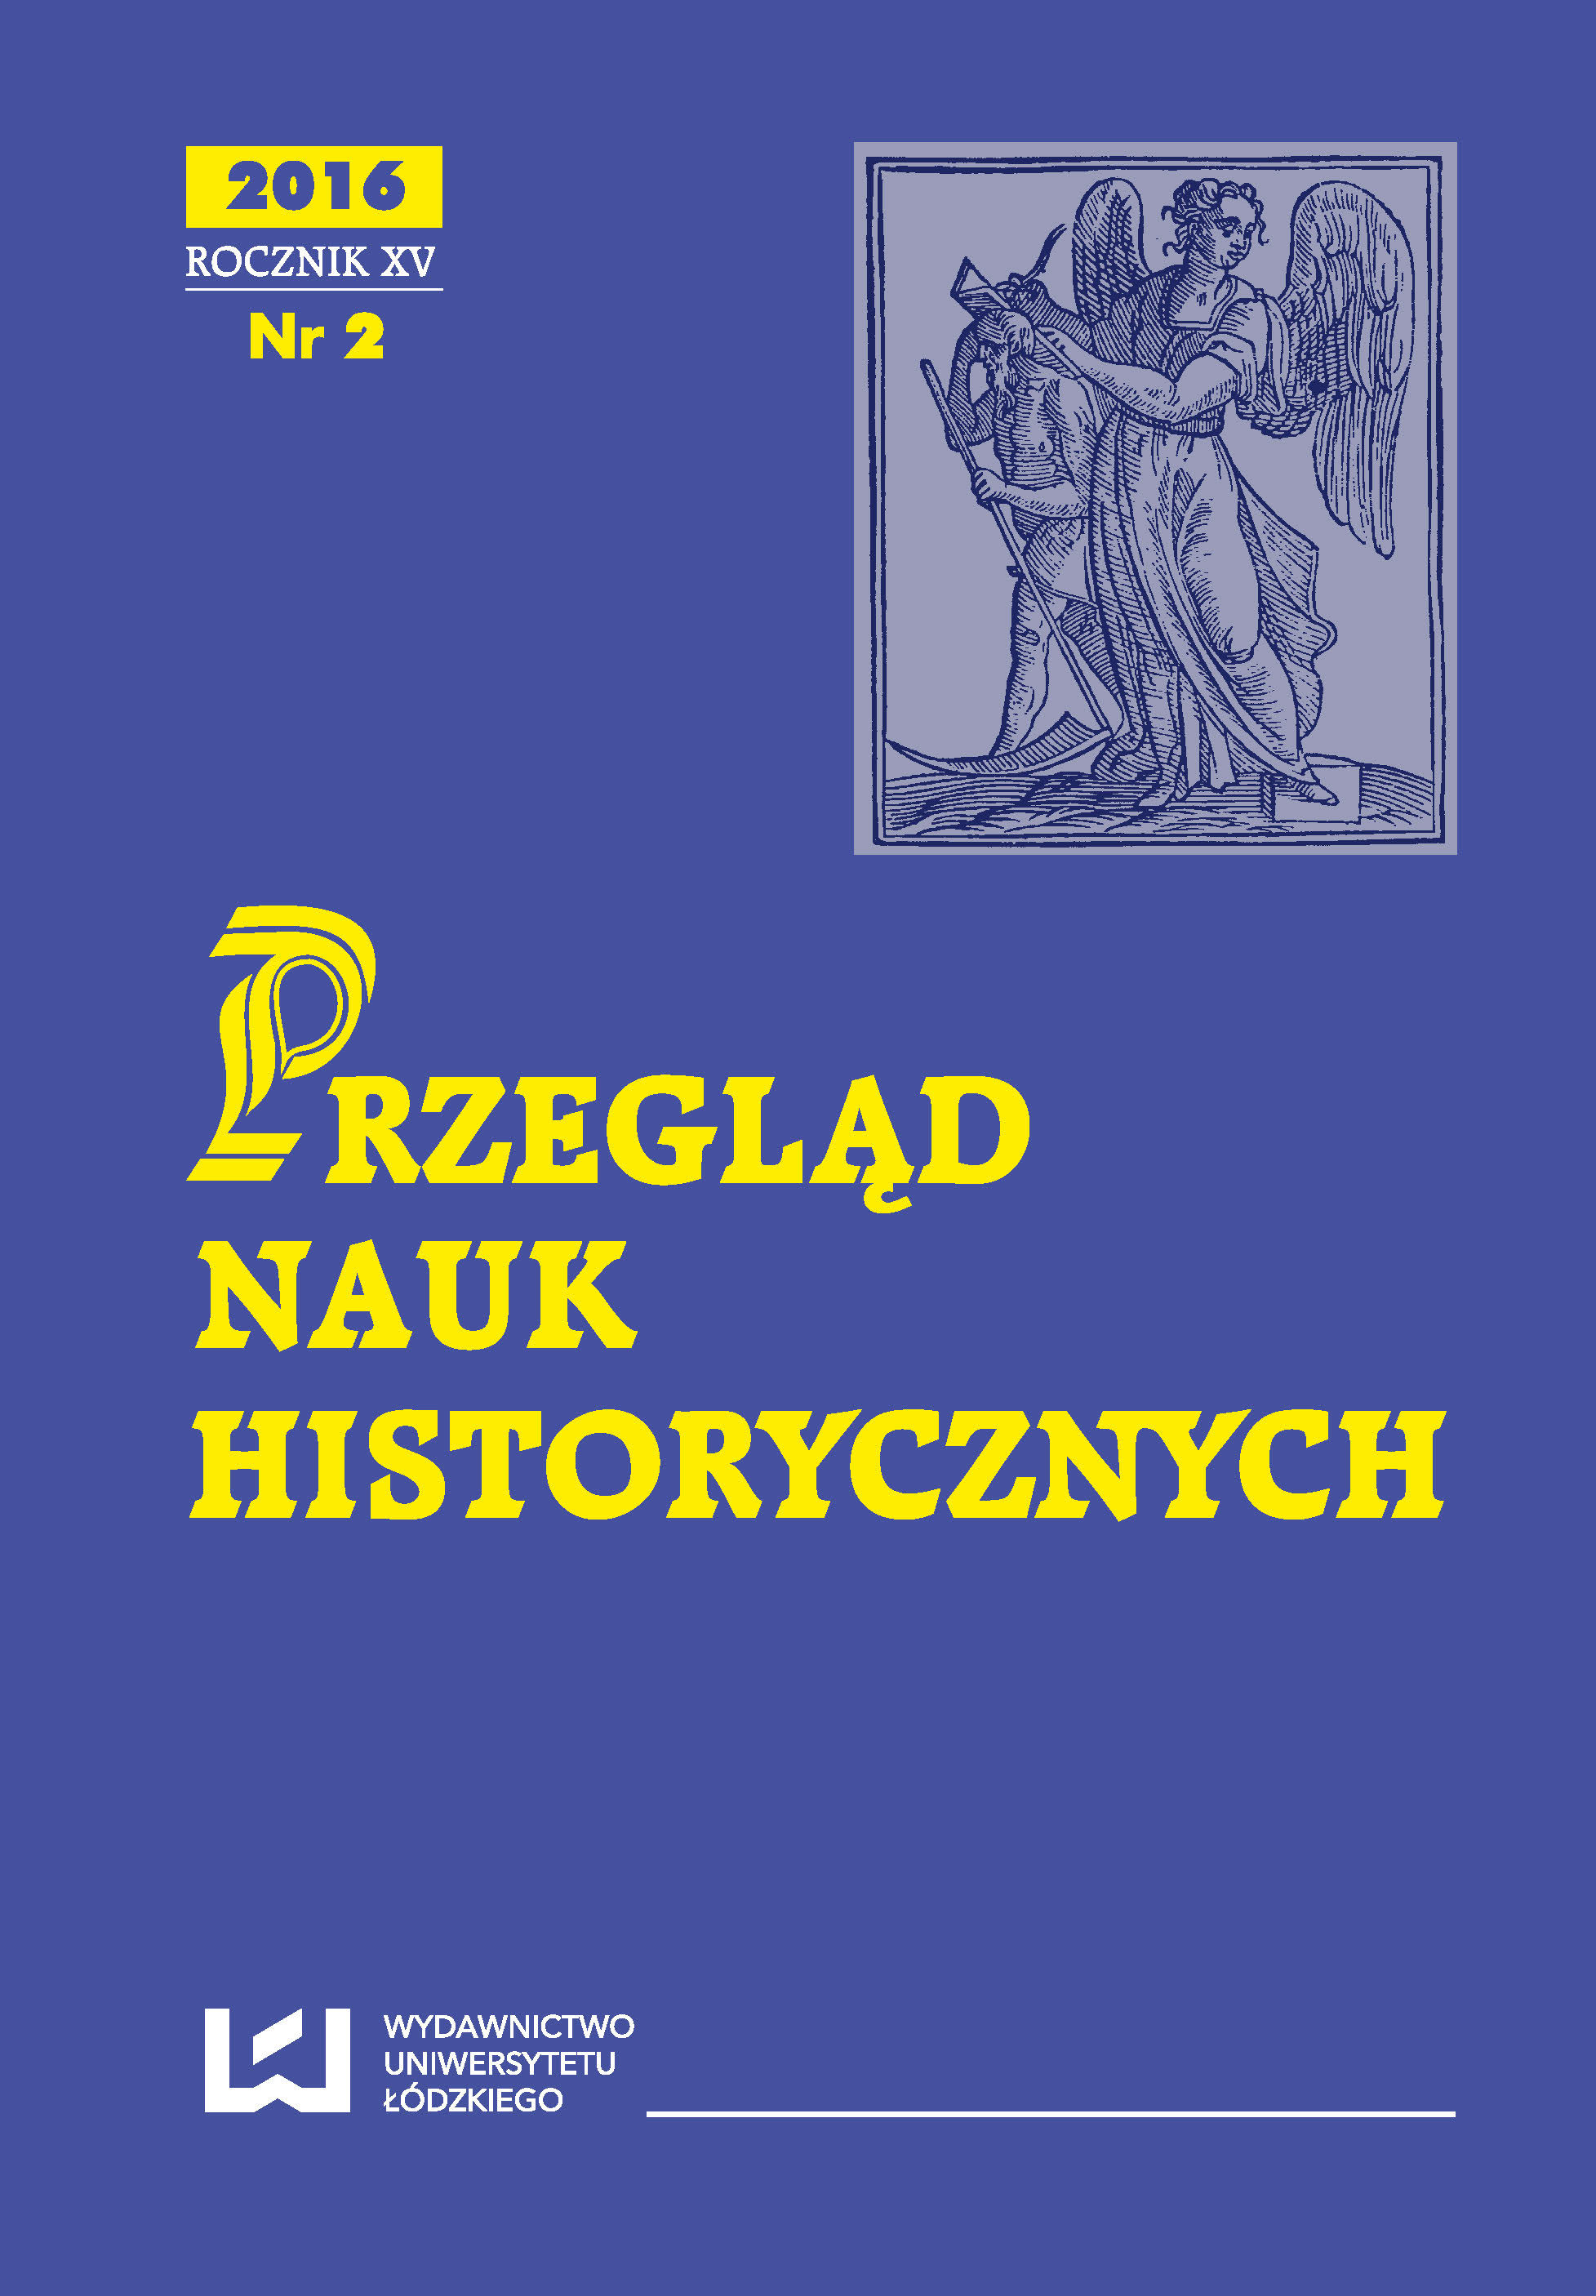 To see through images. Director Hanna Etemadi at the Institute of History of the University of Łódź, 21 October 2015 Cover Image